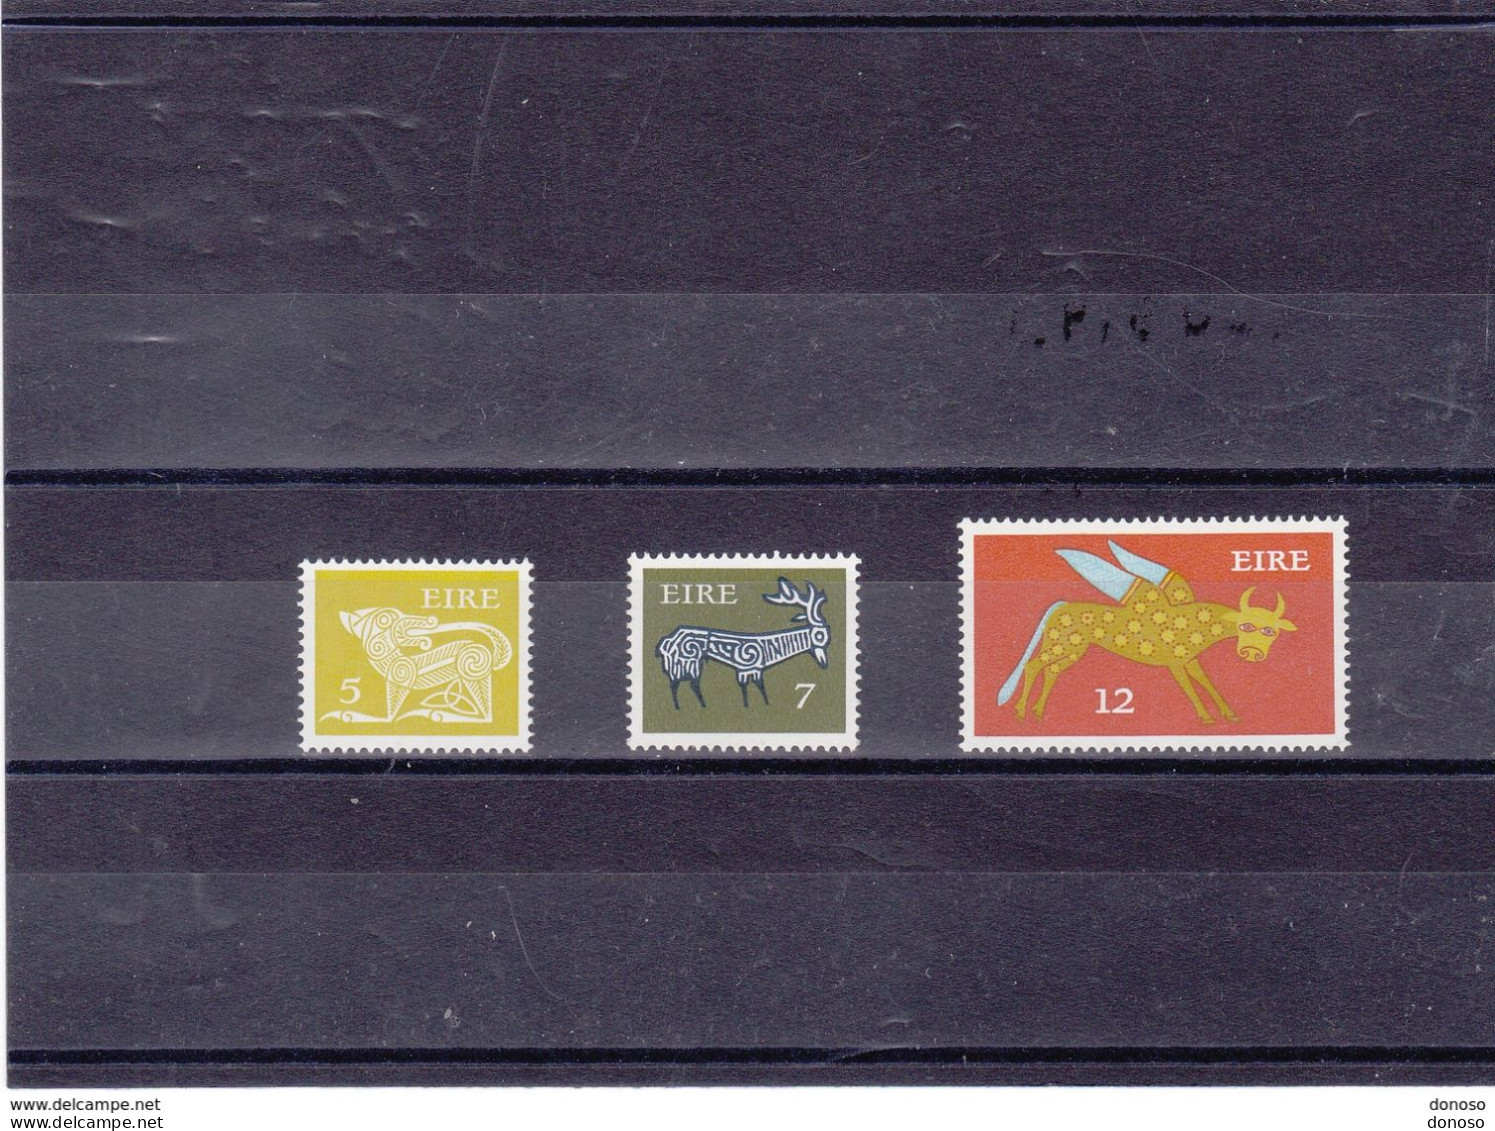 IRLANDE 1974 Série Courante  Yvert 300-302, Michel 298-300 NEUF** MNH Cote Yv 15 Euros - Unused Stamps